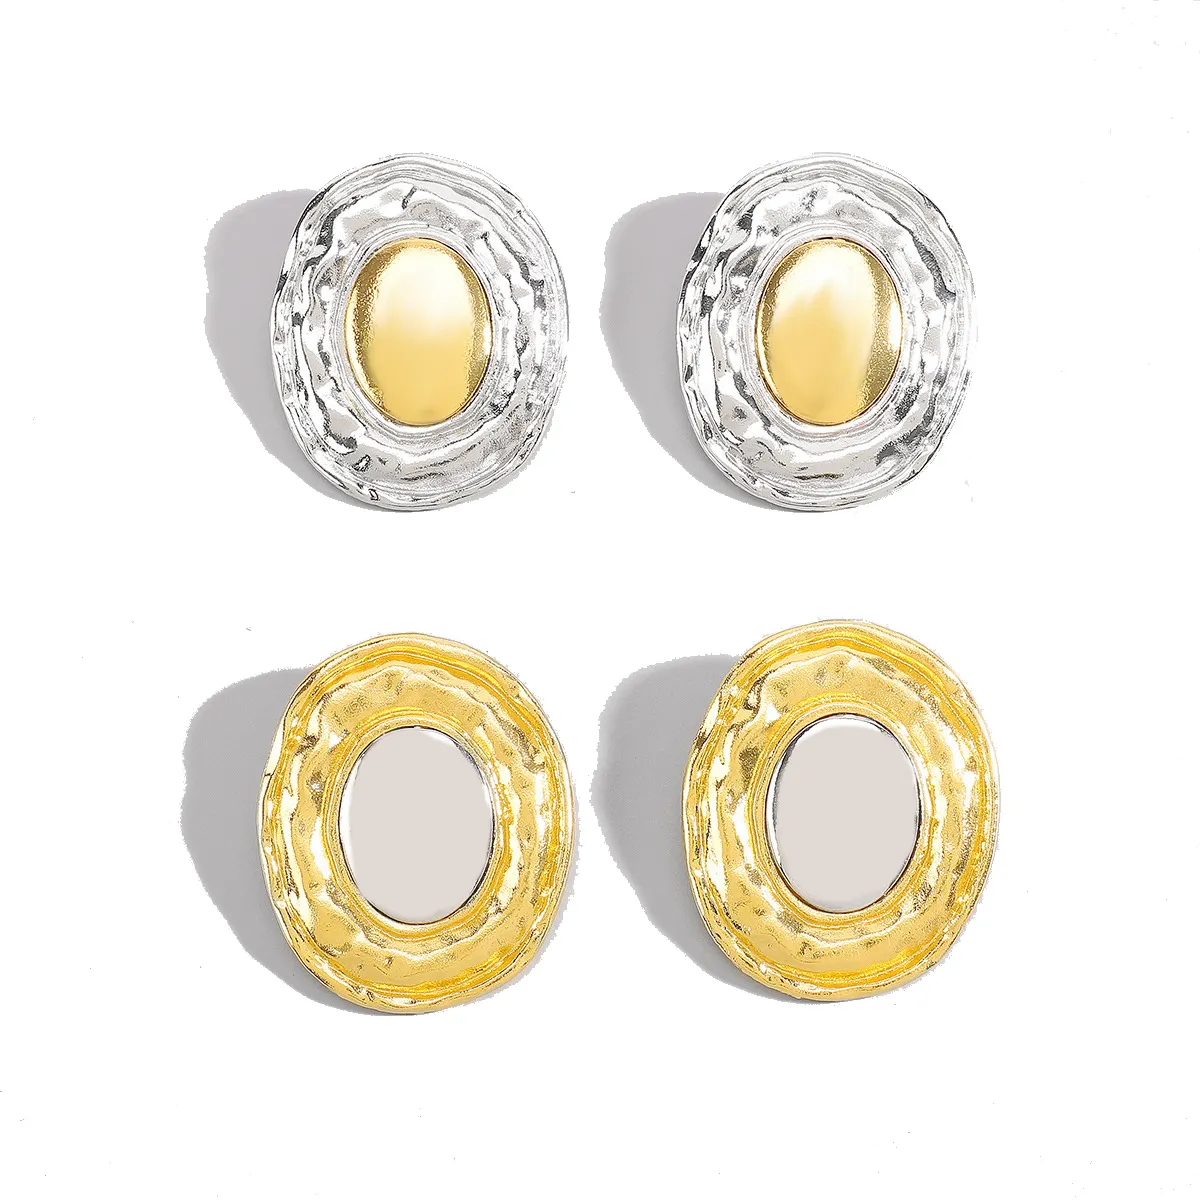 New Arrival Fashion Jewelry Exaggerated Alloy Circular Metal Gold And Silver Color Matching Geometric Stud Earrings For Women